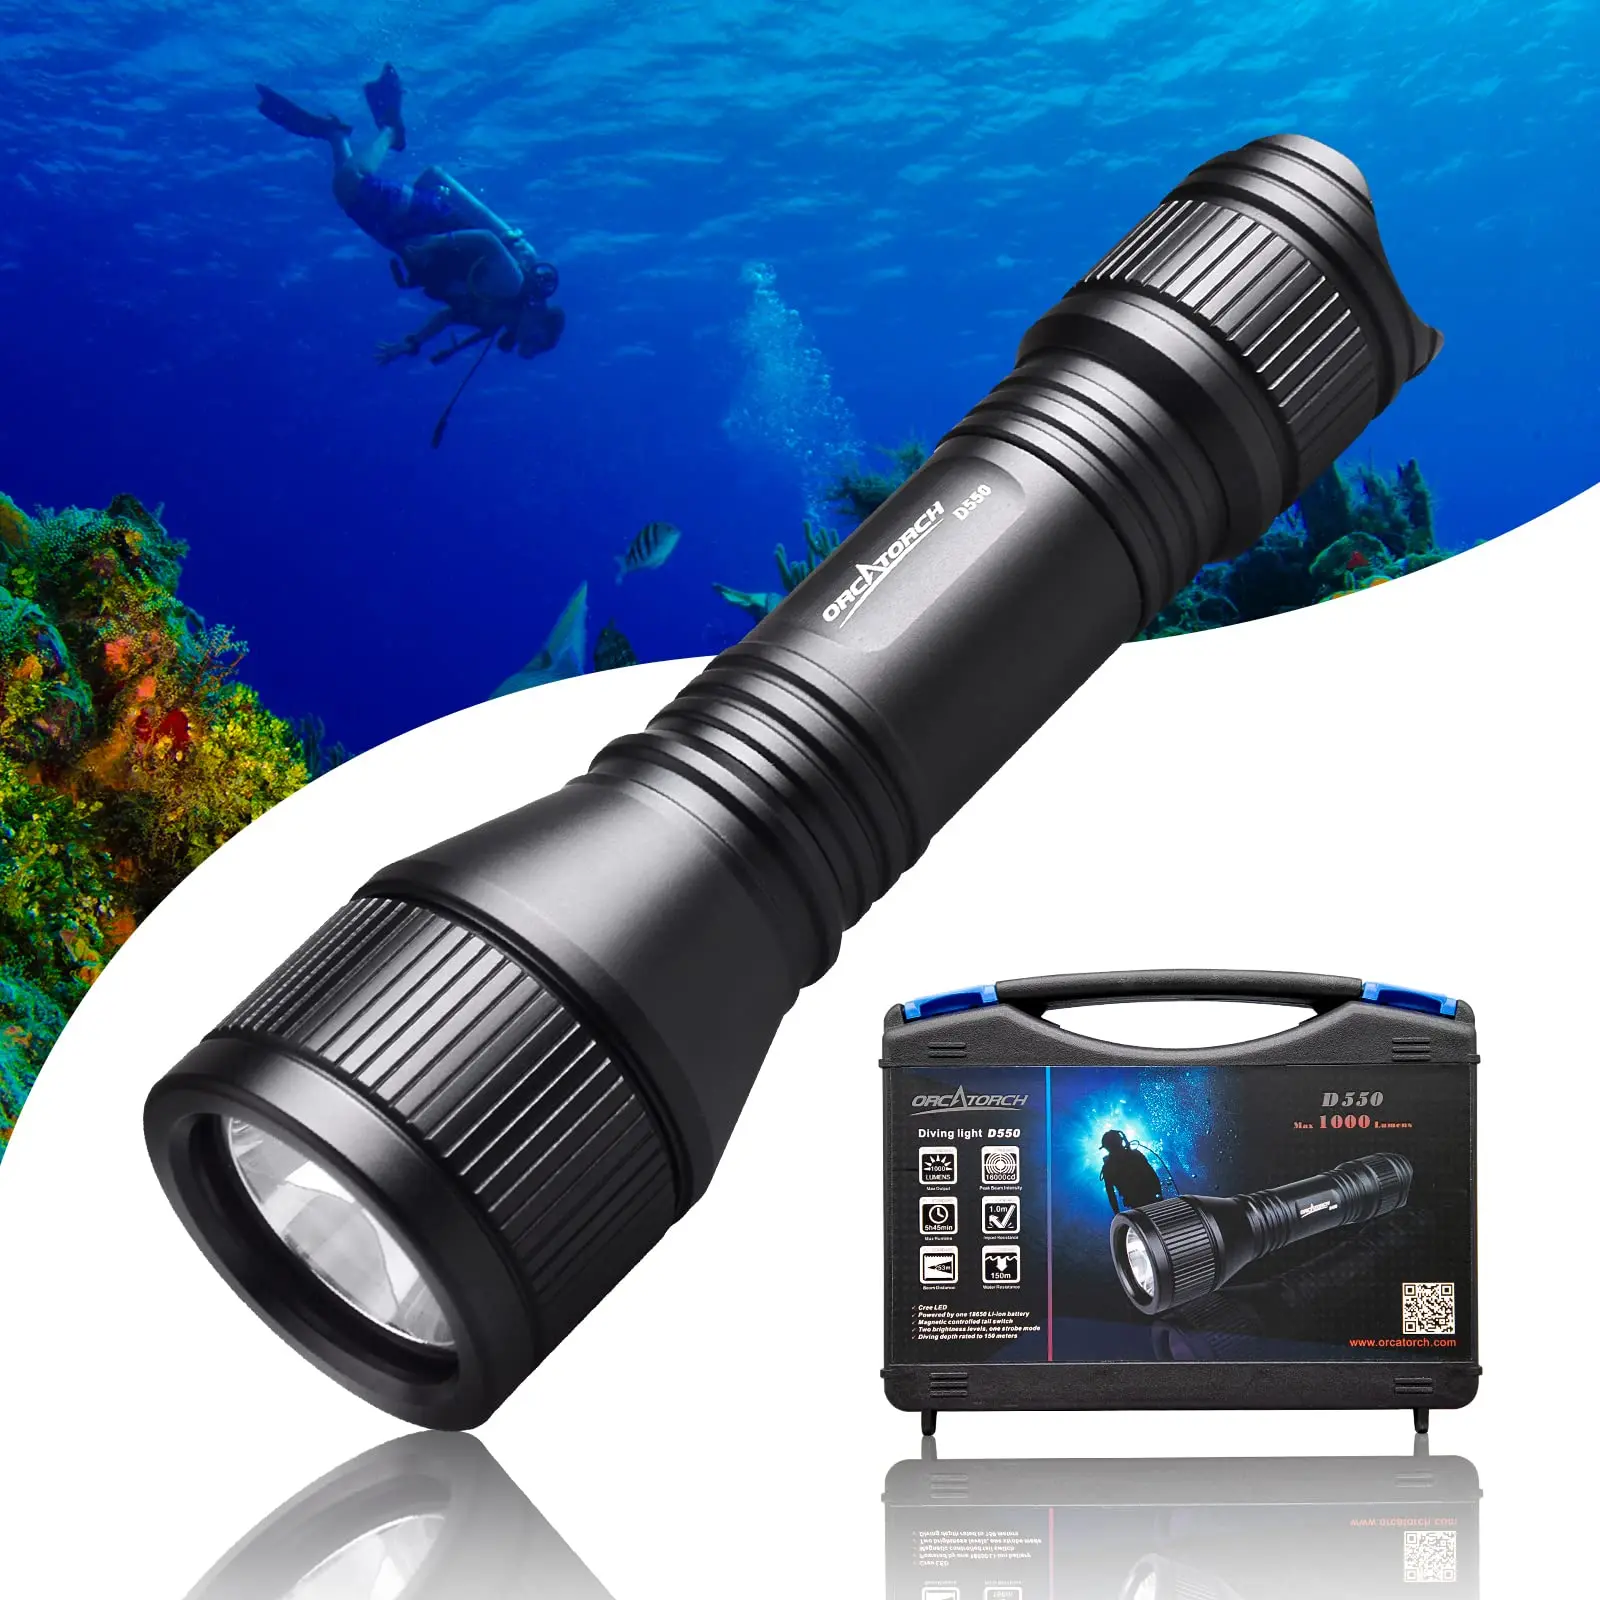 IP68 Waterproof Night Dive Torch150 Meters1000Lumens Super Bright Underwater Diving Flashlight with 3 Modes Scuba Dive Light